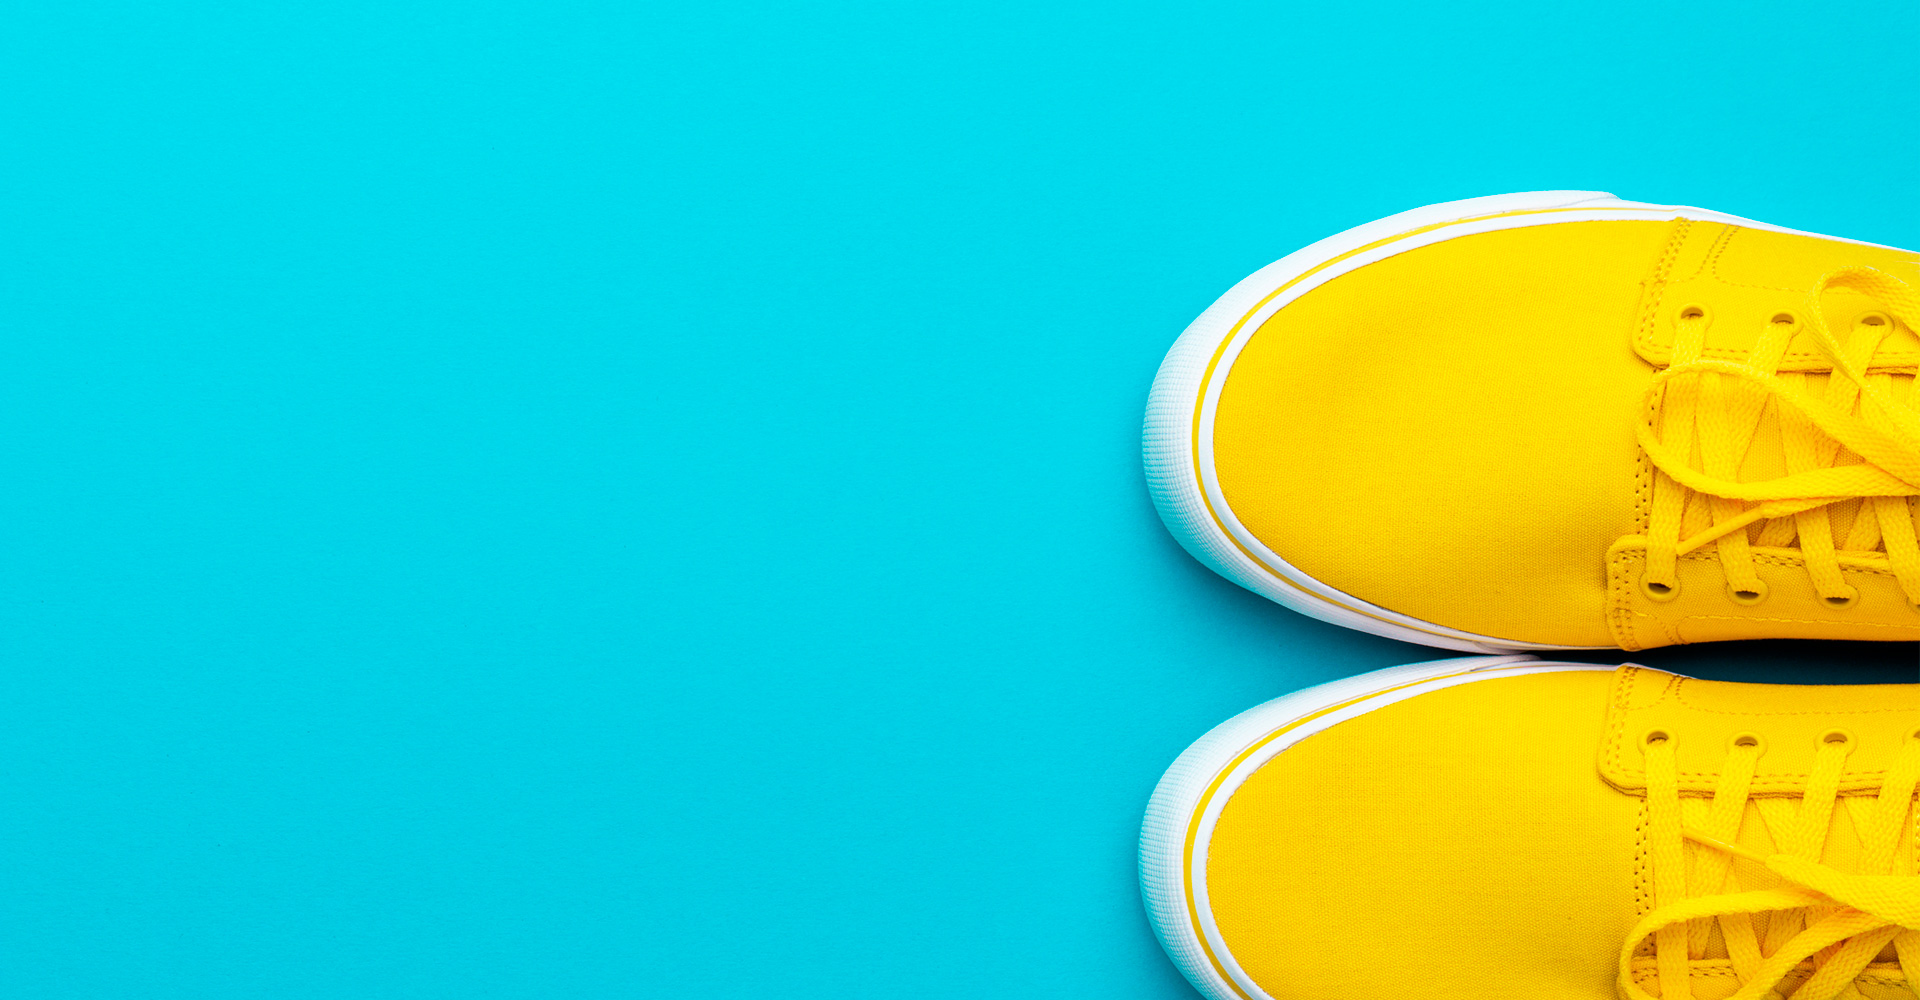 Yellow sneakers on a blue background.